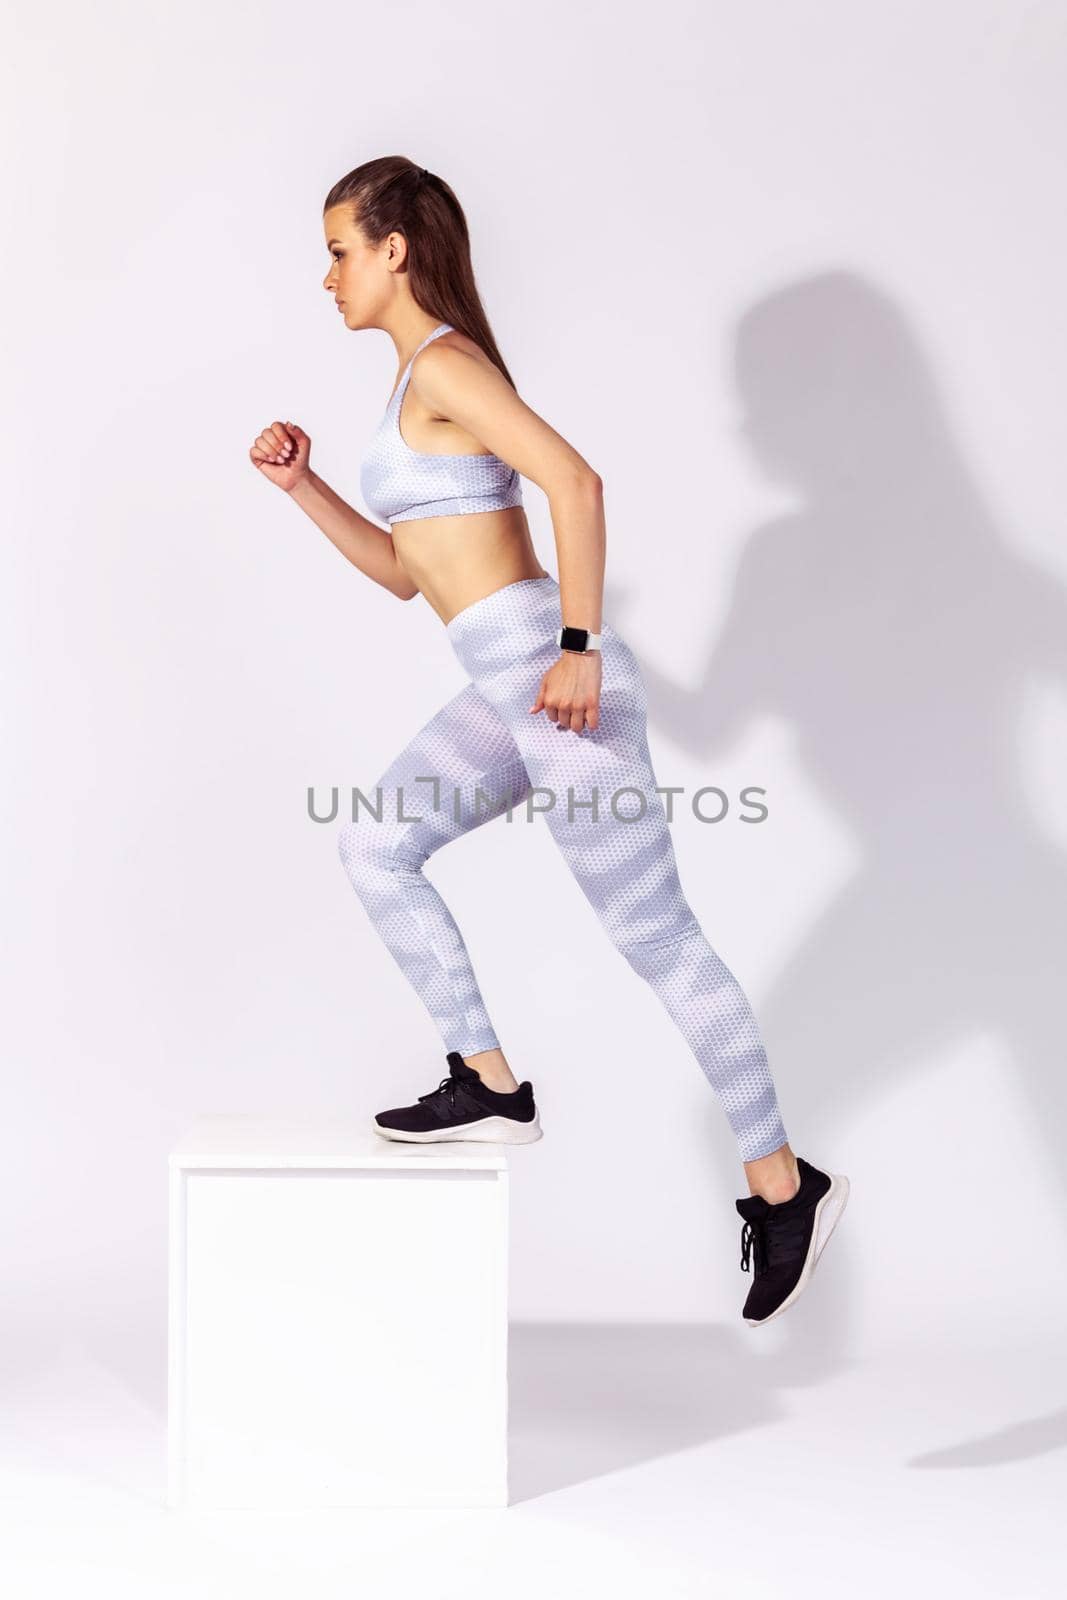 Indoor sport of young woman on white background. by Khosro1